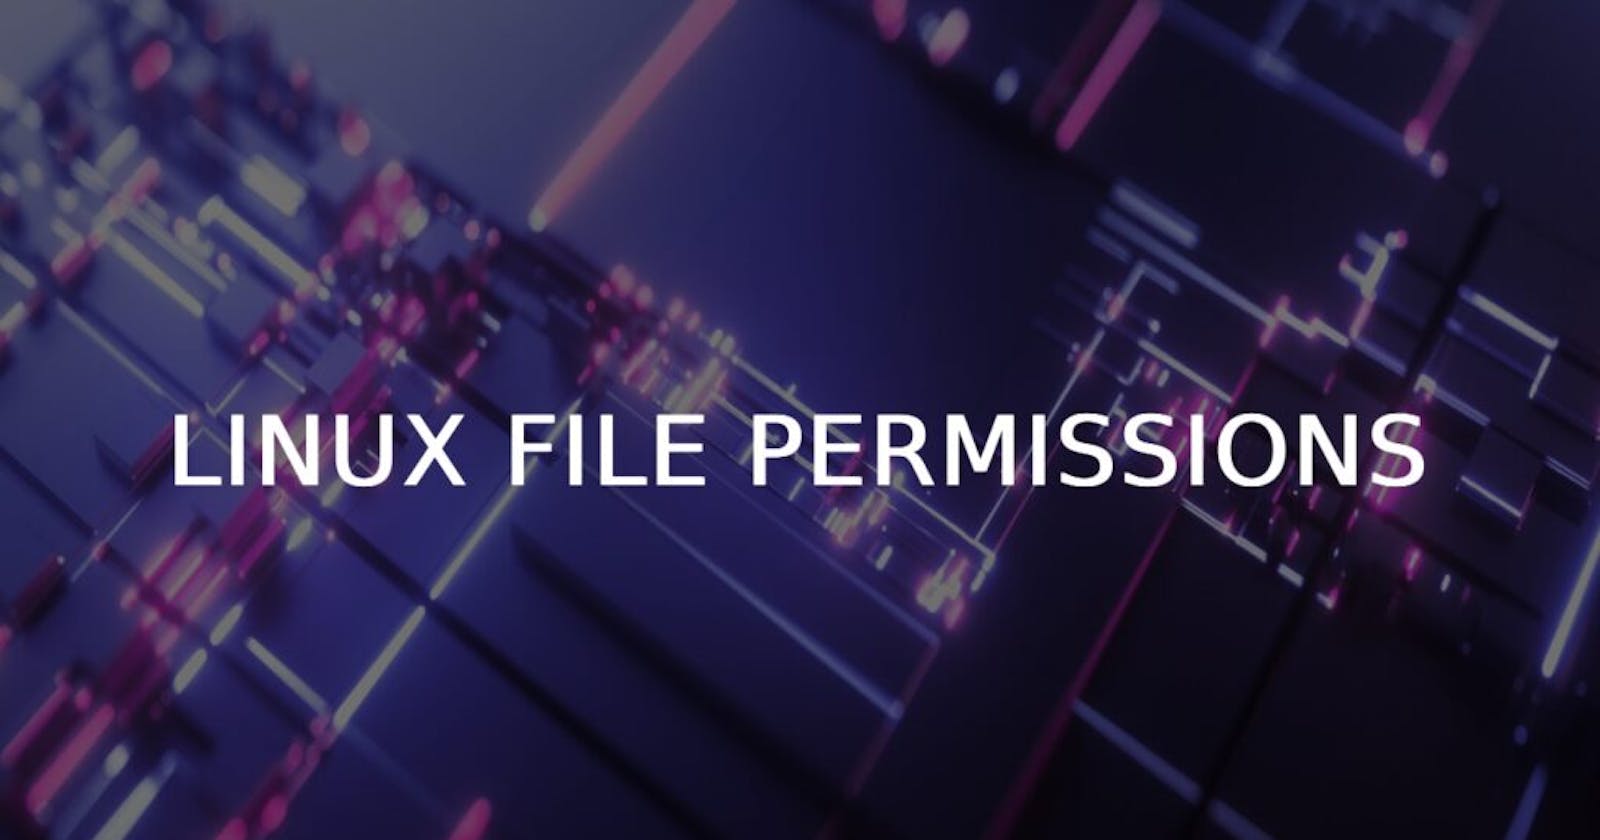 File Permissions and Access Control Lists